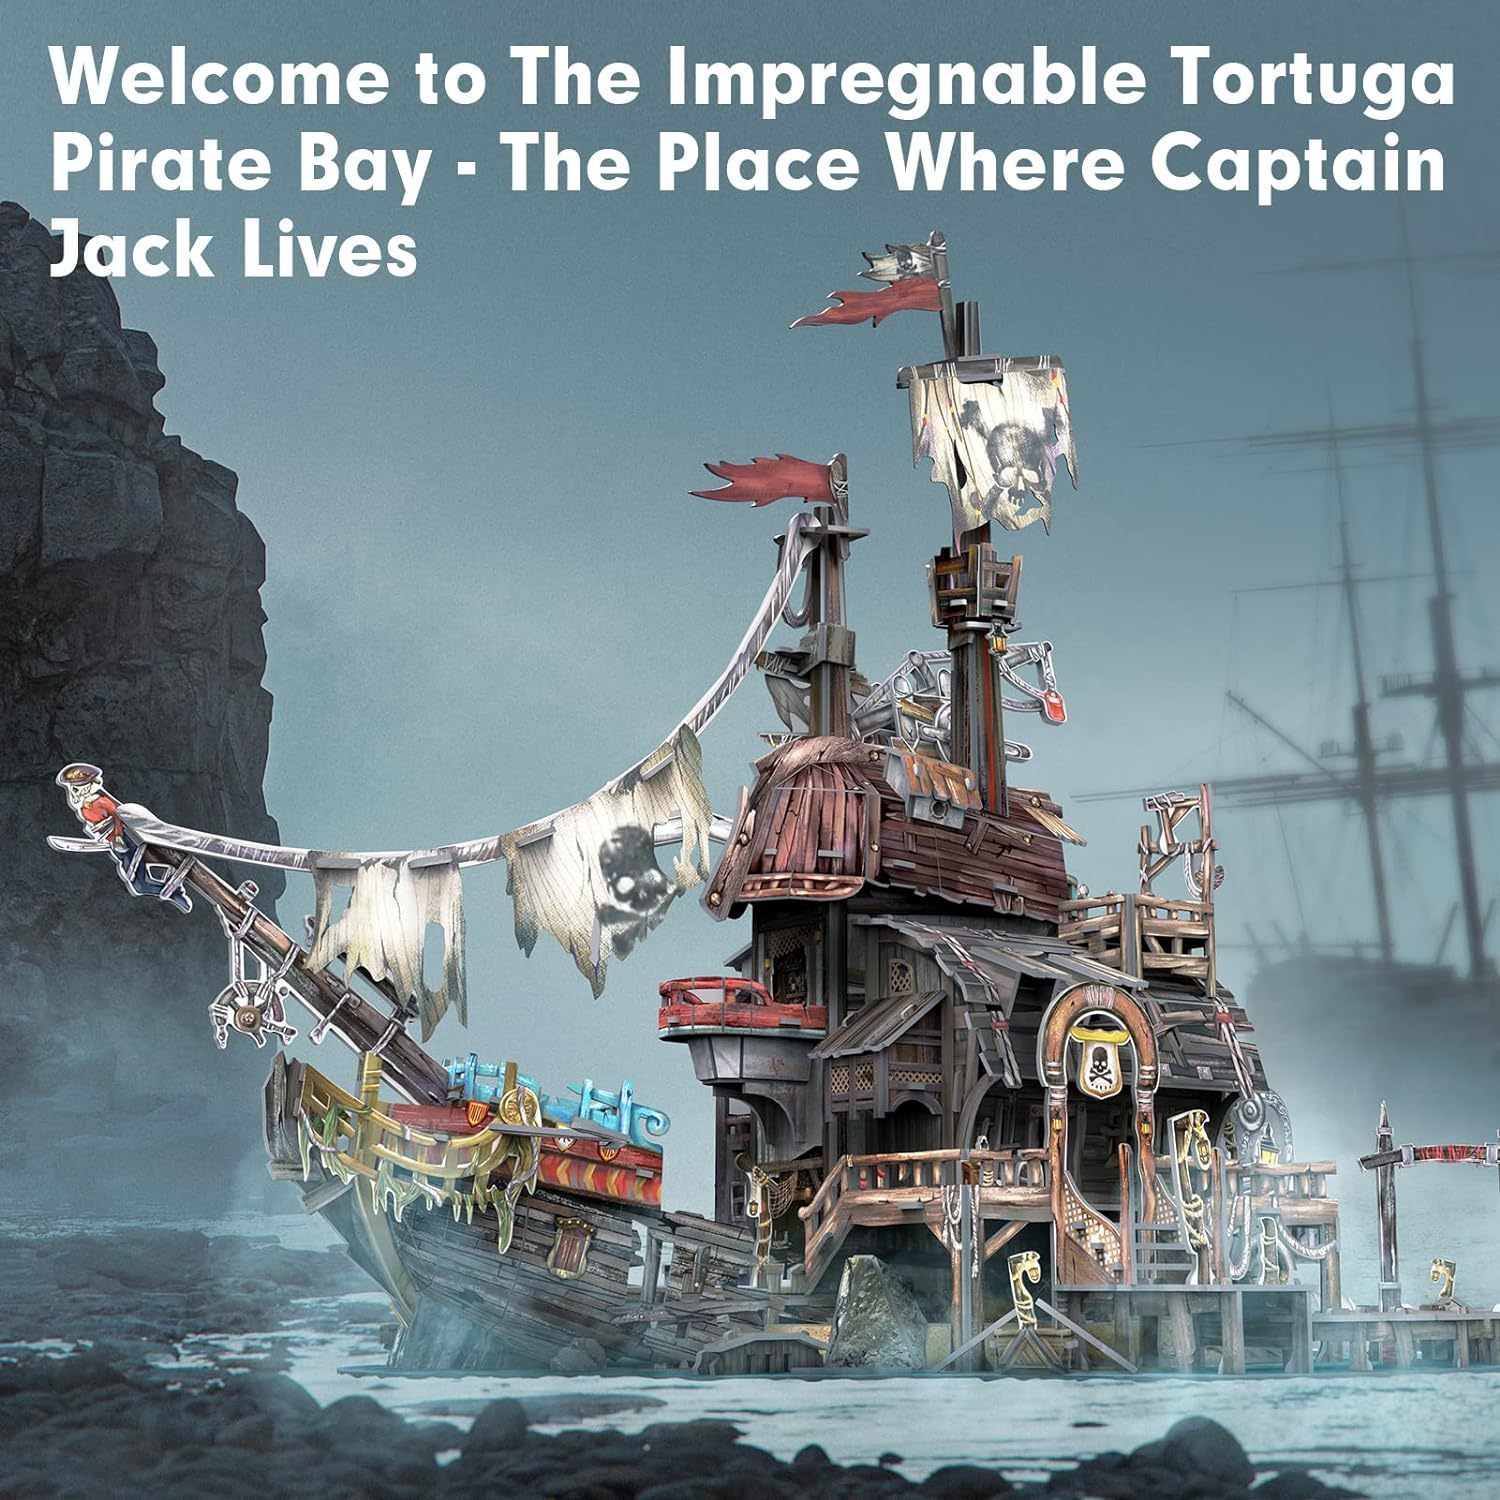 

3d Puzzles For Adults Tortuga Pirate Bay Cool Pirate Shipwreck Halloween Decoration Indoor Model Kits Ragged Pirate Ship Crafts For Adults Birthday Gift For Women Men